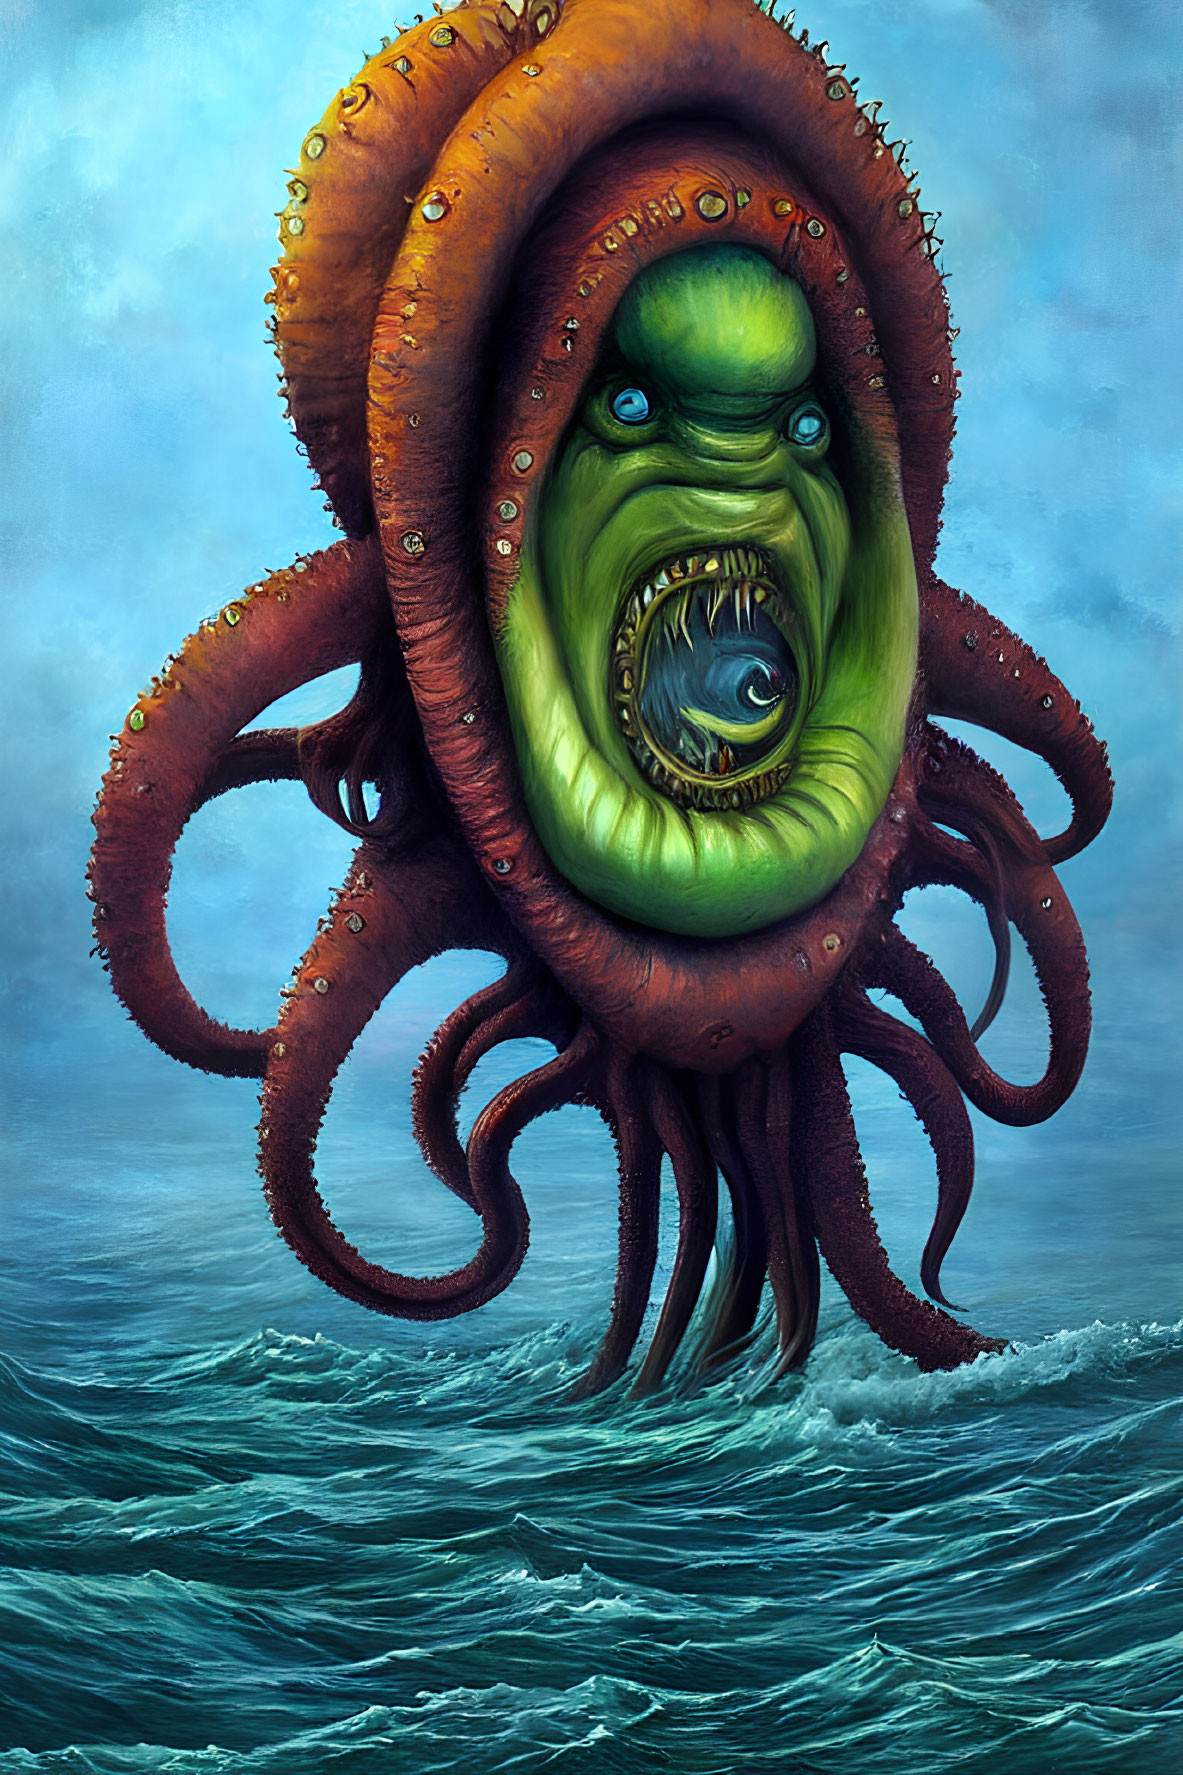 Colorful Illustration of Menacing Octopus with Green Humanoid Face